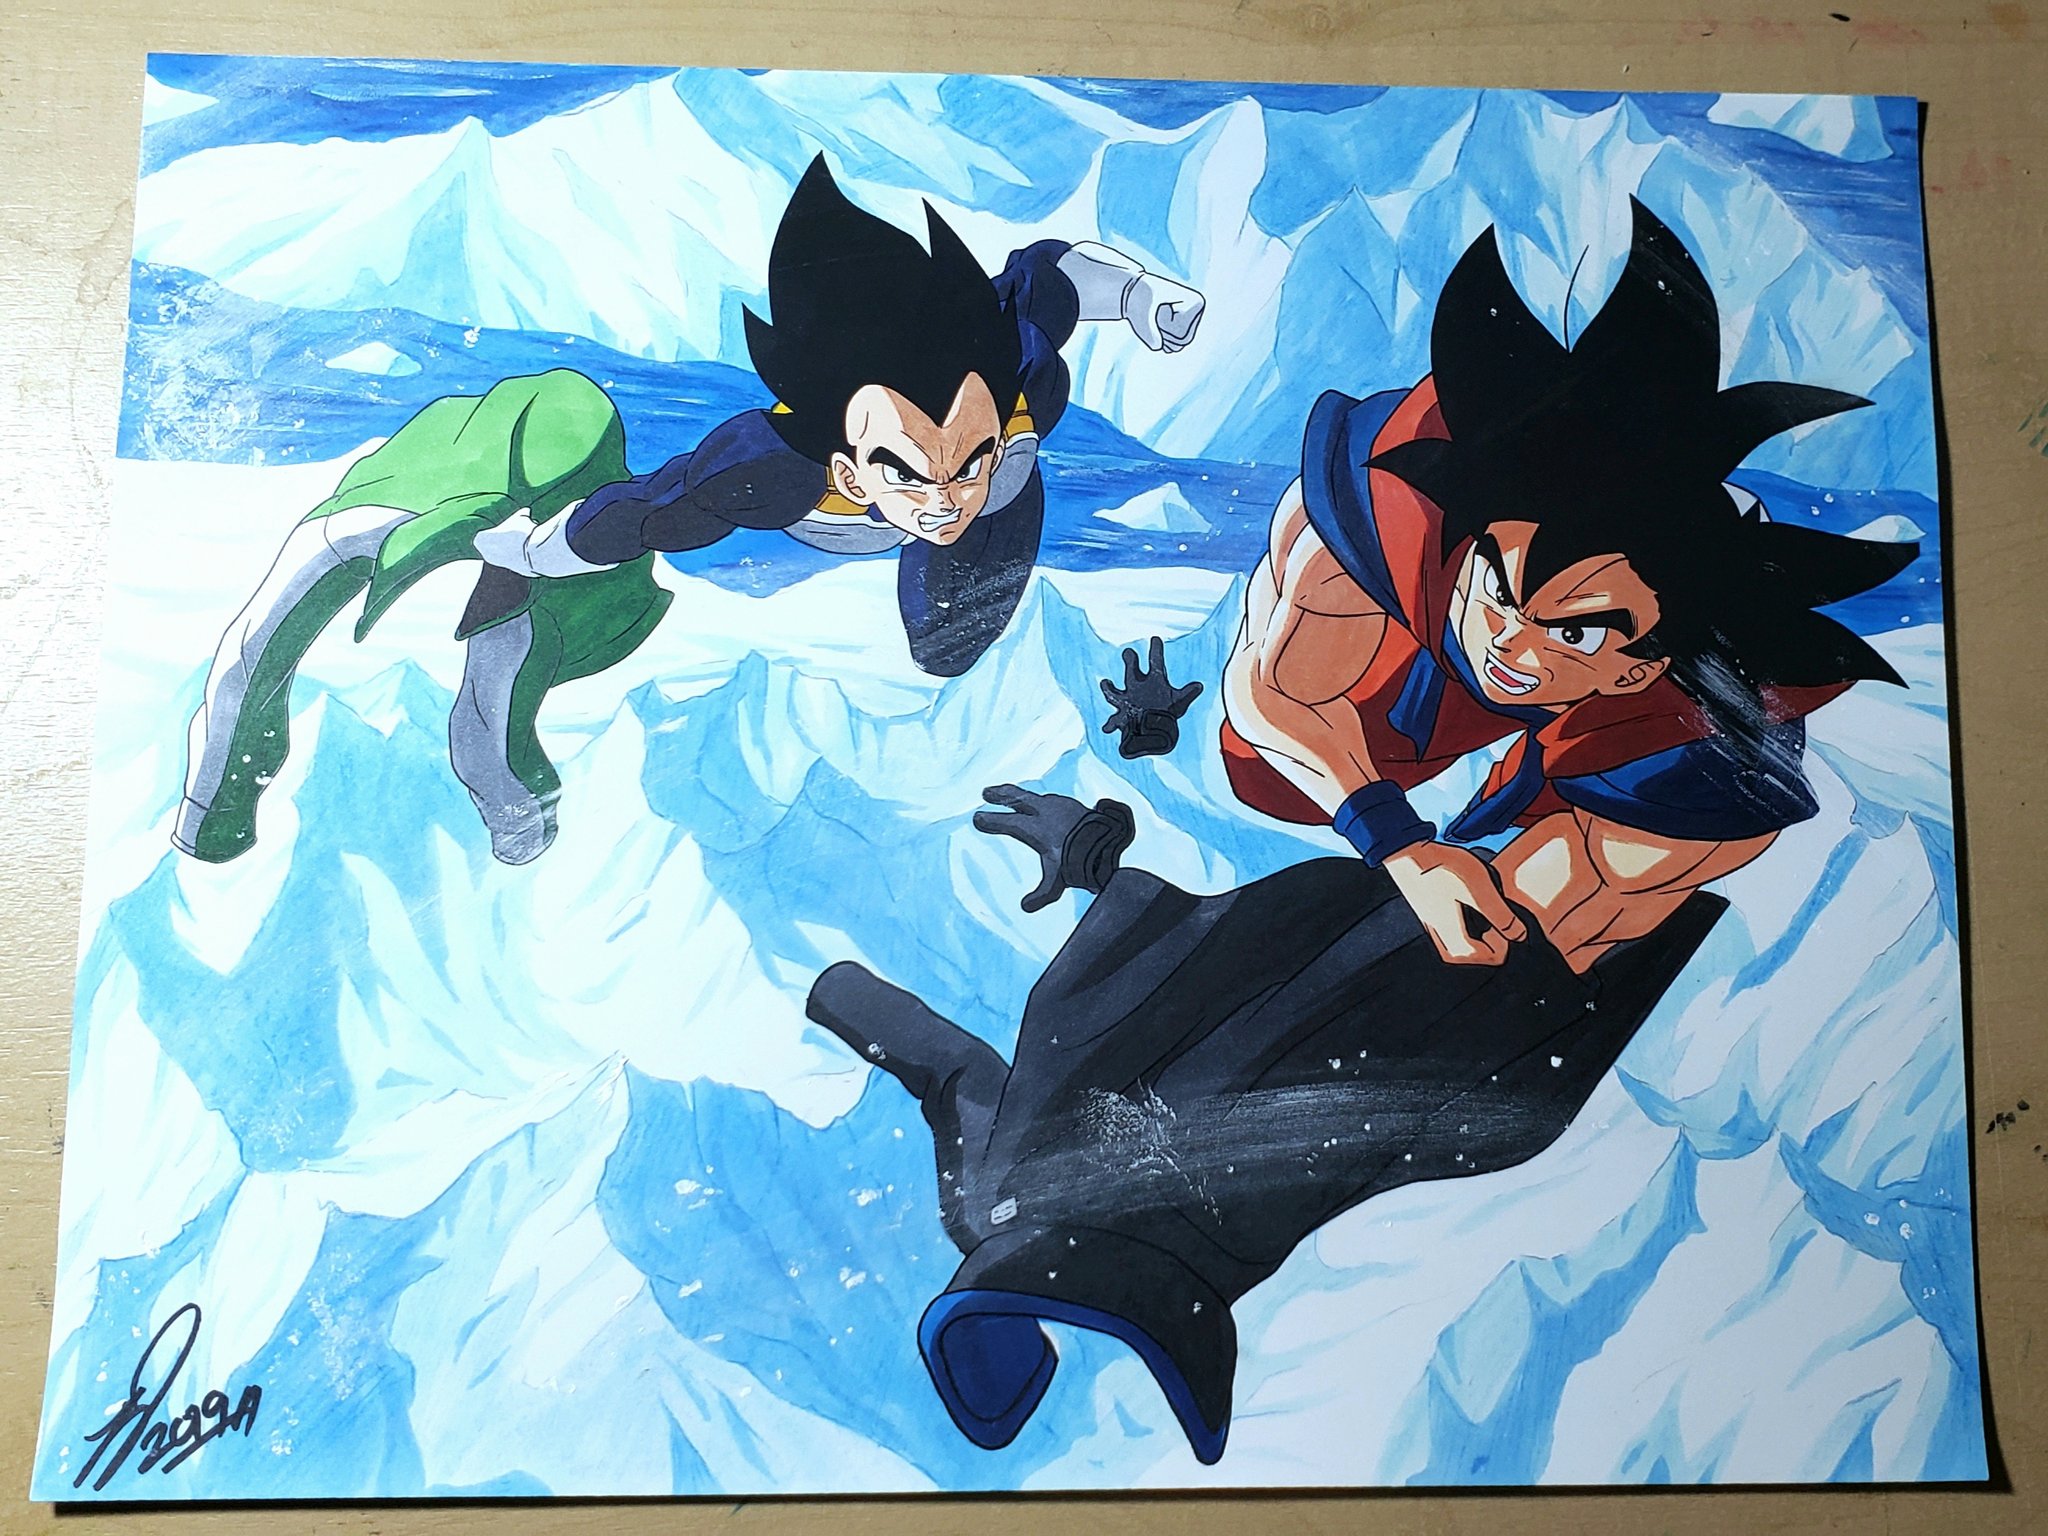 Buy Altered Emotions Anime Dragonball Z Dragon Ball Super Online in India   Etsy